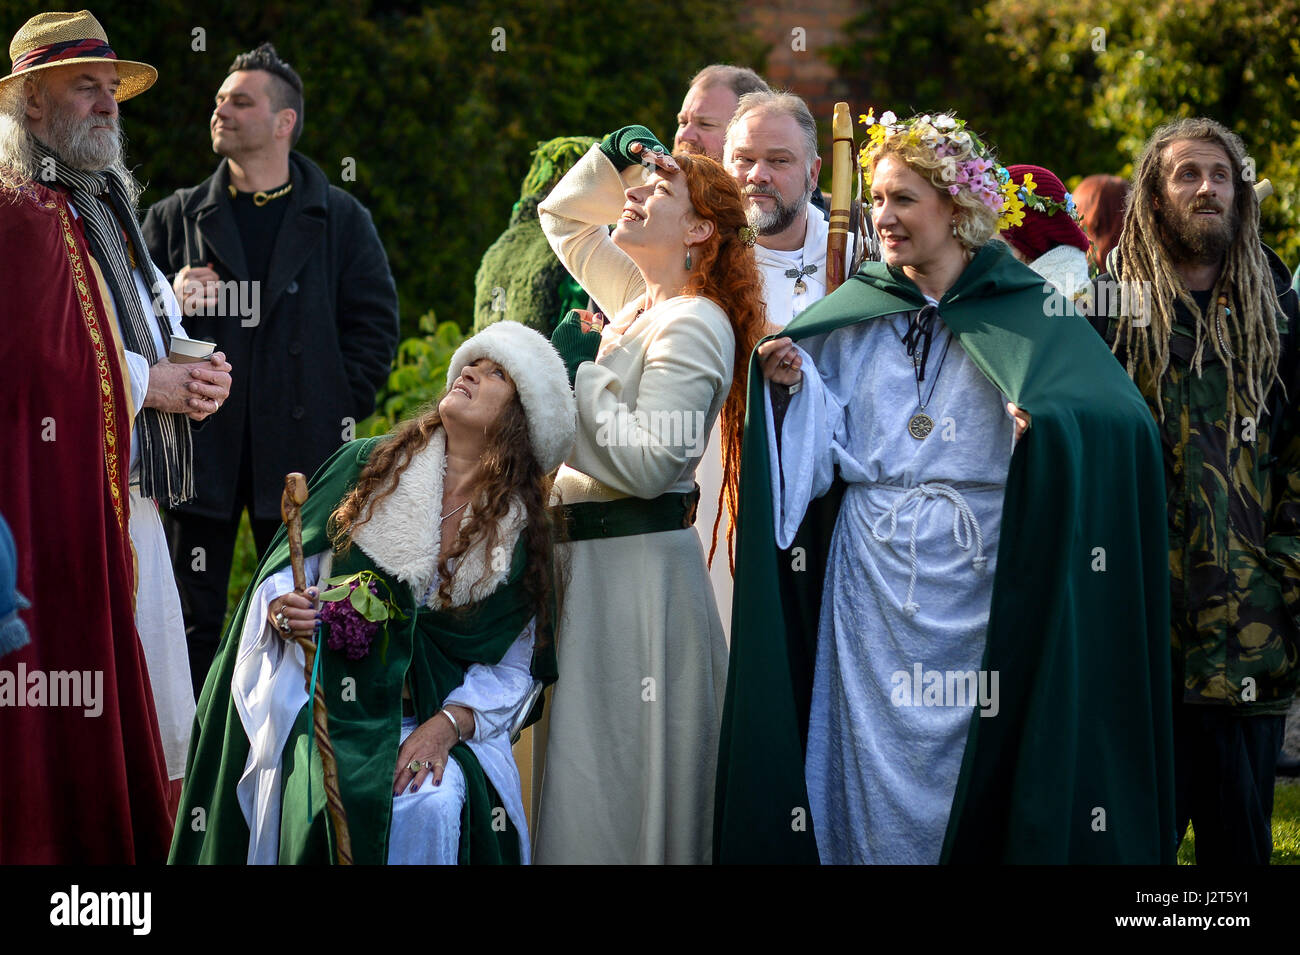 People at Chalice Well, Glastonbury, where Beltane festivities are taking place on May Day. Stock Photo